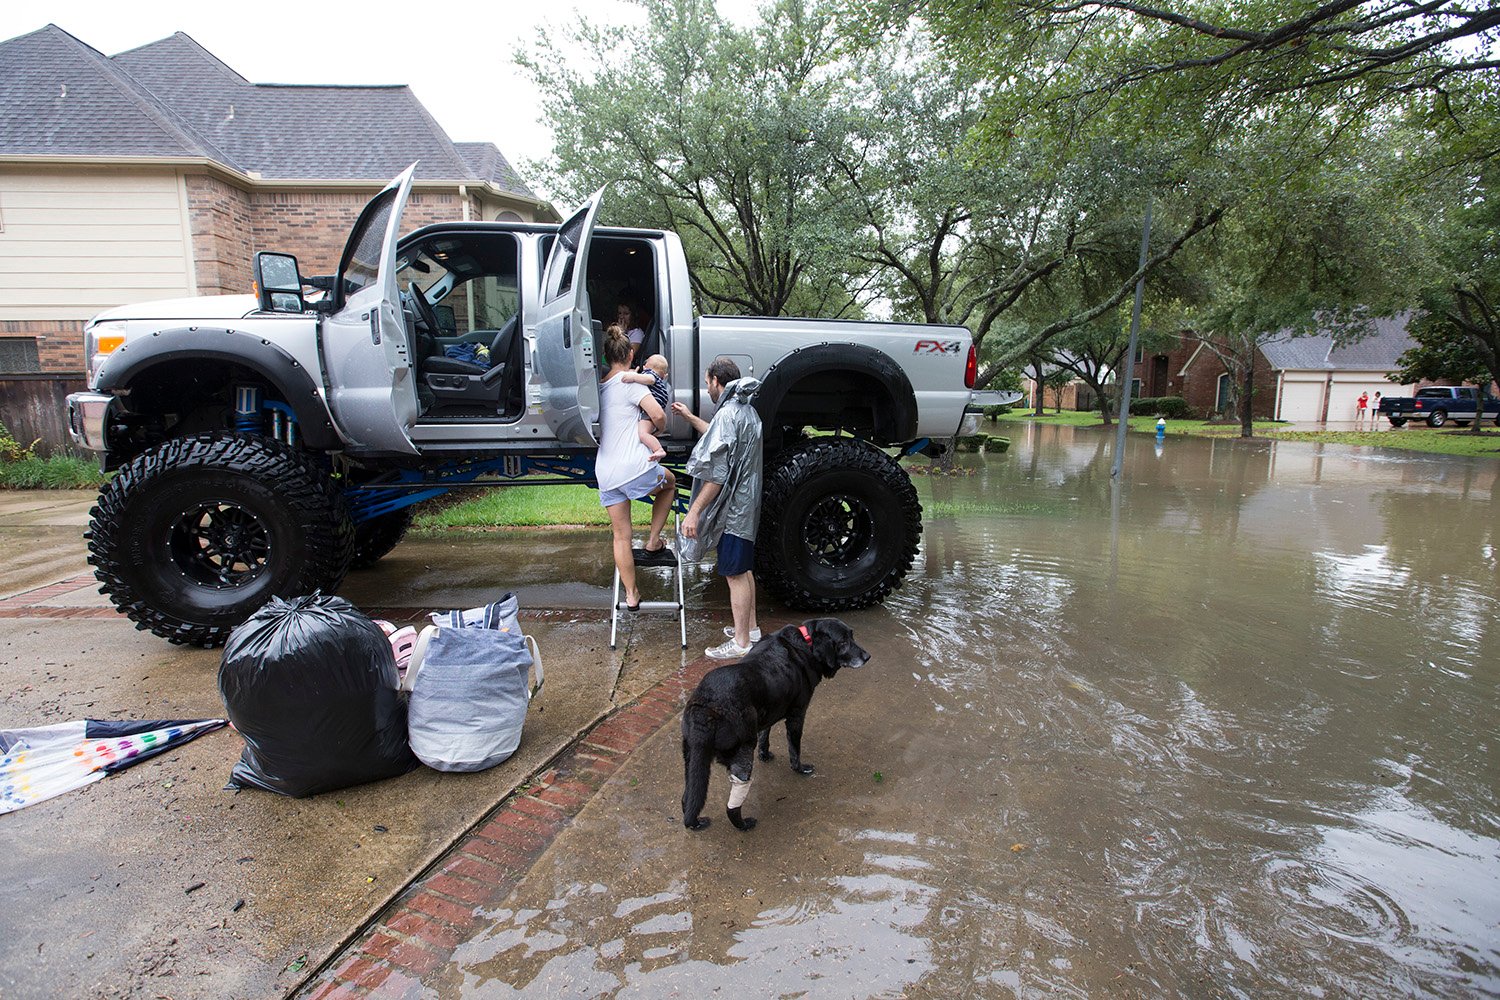 Chris Ginter, right, helps a family into his truck in Houston on Tuesday, Aug. 29, 2017. Ginter is helping evacuate people from their flooded neighborhood near Buffalo Bayou.